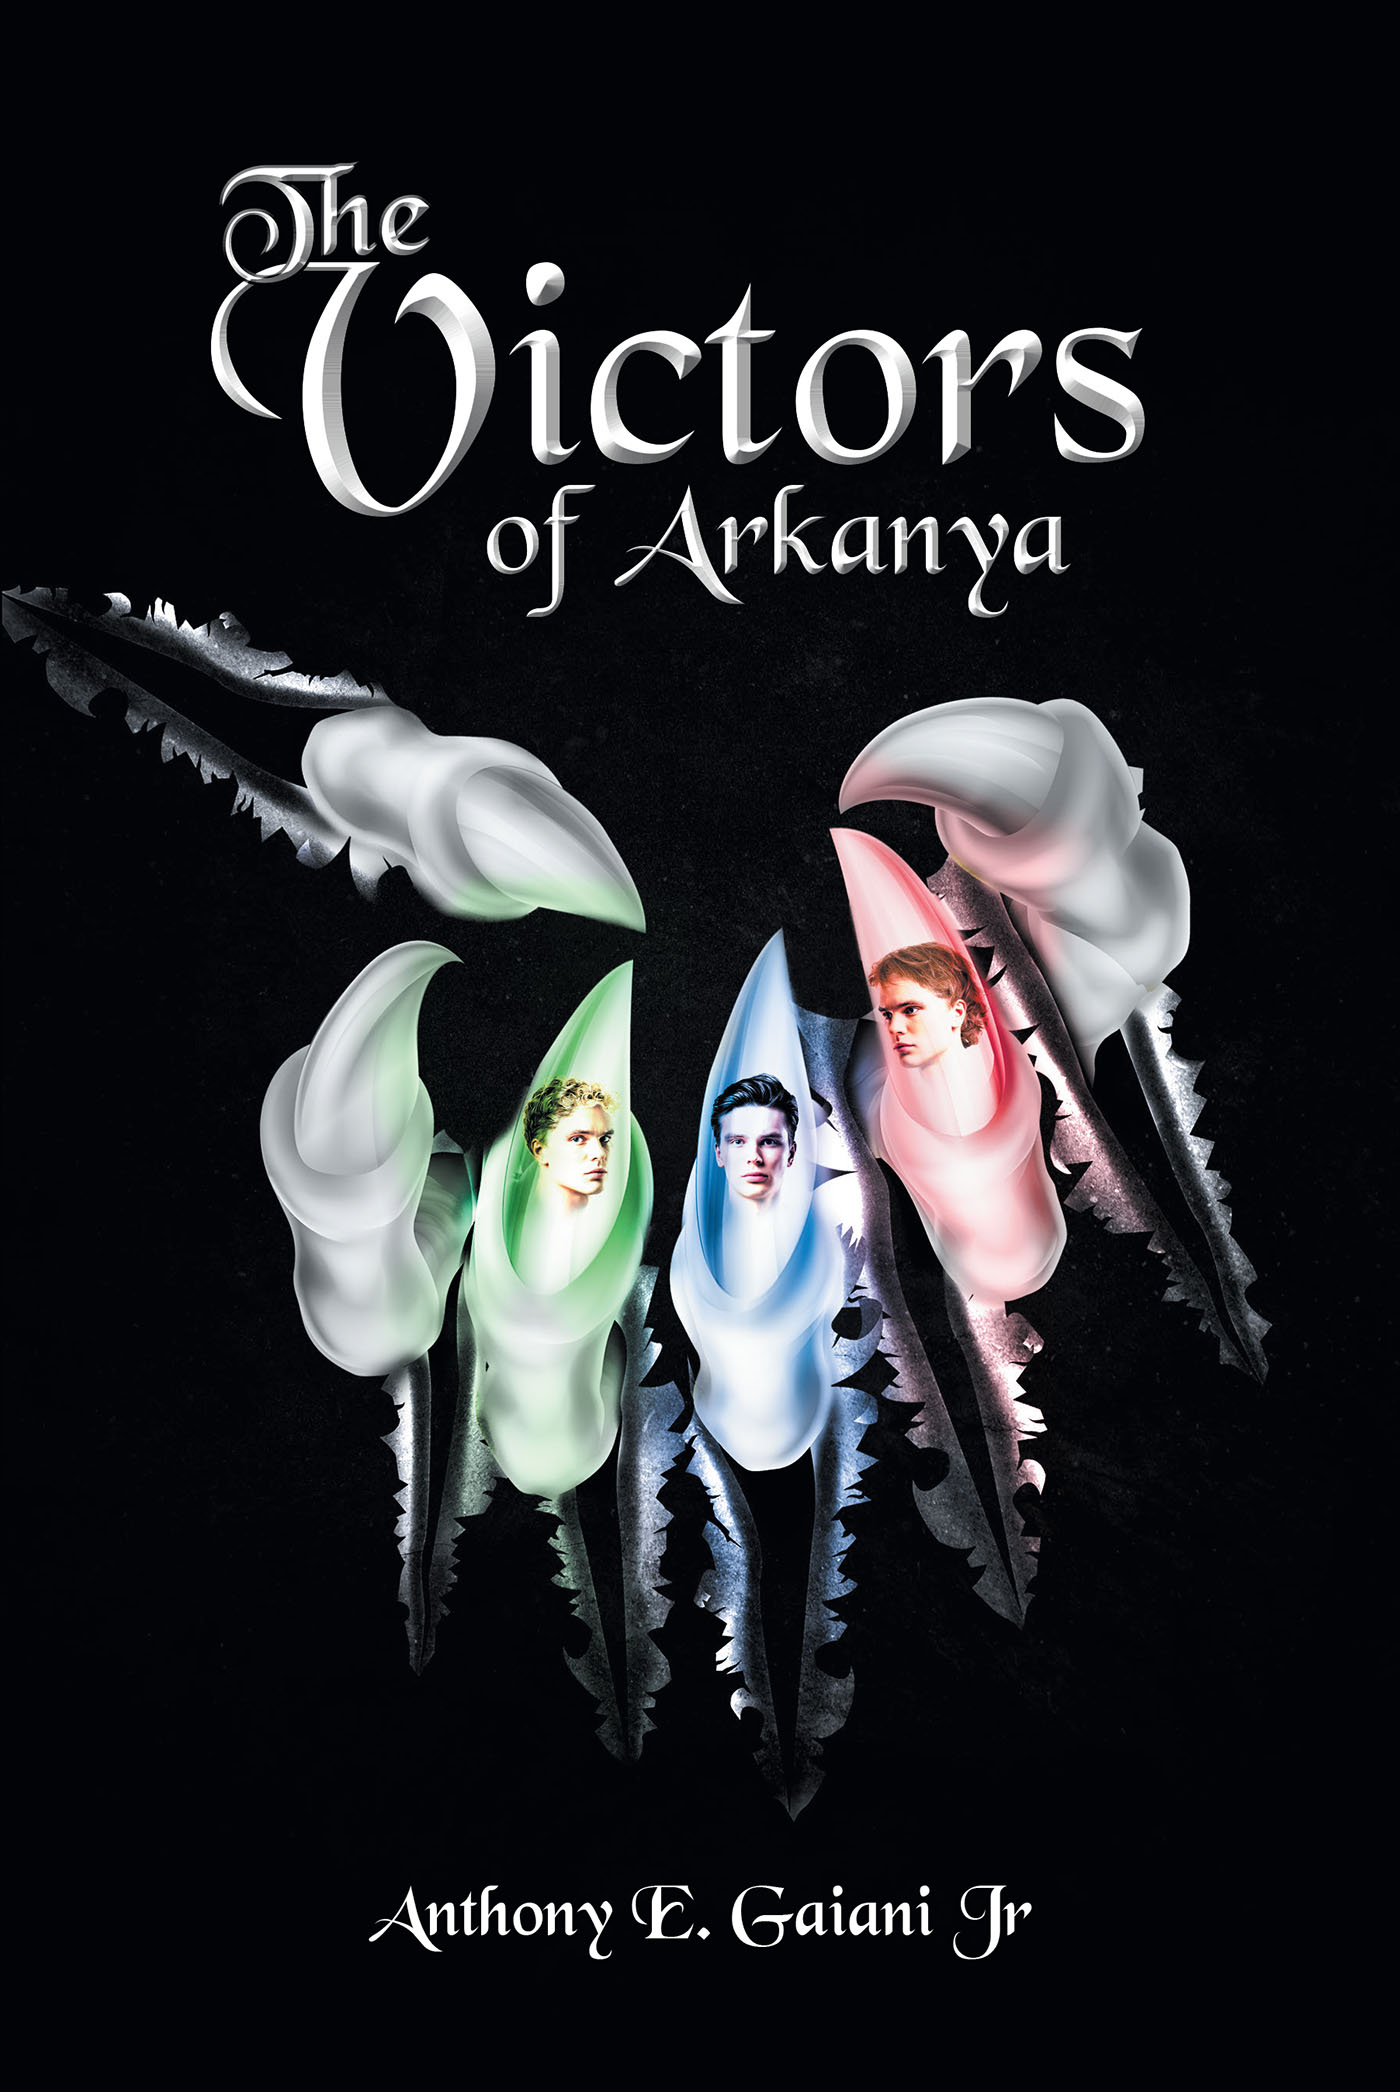 Anthony E. Gaiani Jr’s Book, "The Victors of Arkanya," is a Stirring Fantasy About 3 Brothers Who Can Save the World, But First Must be Found and Believe in Their Destiny